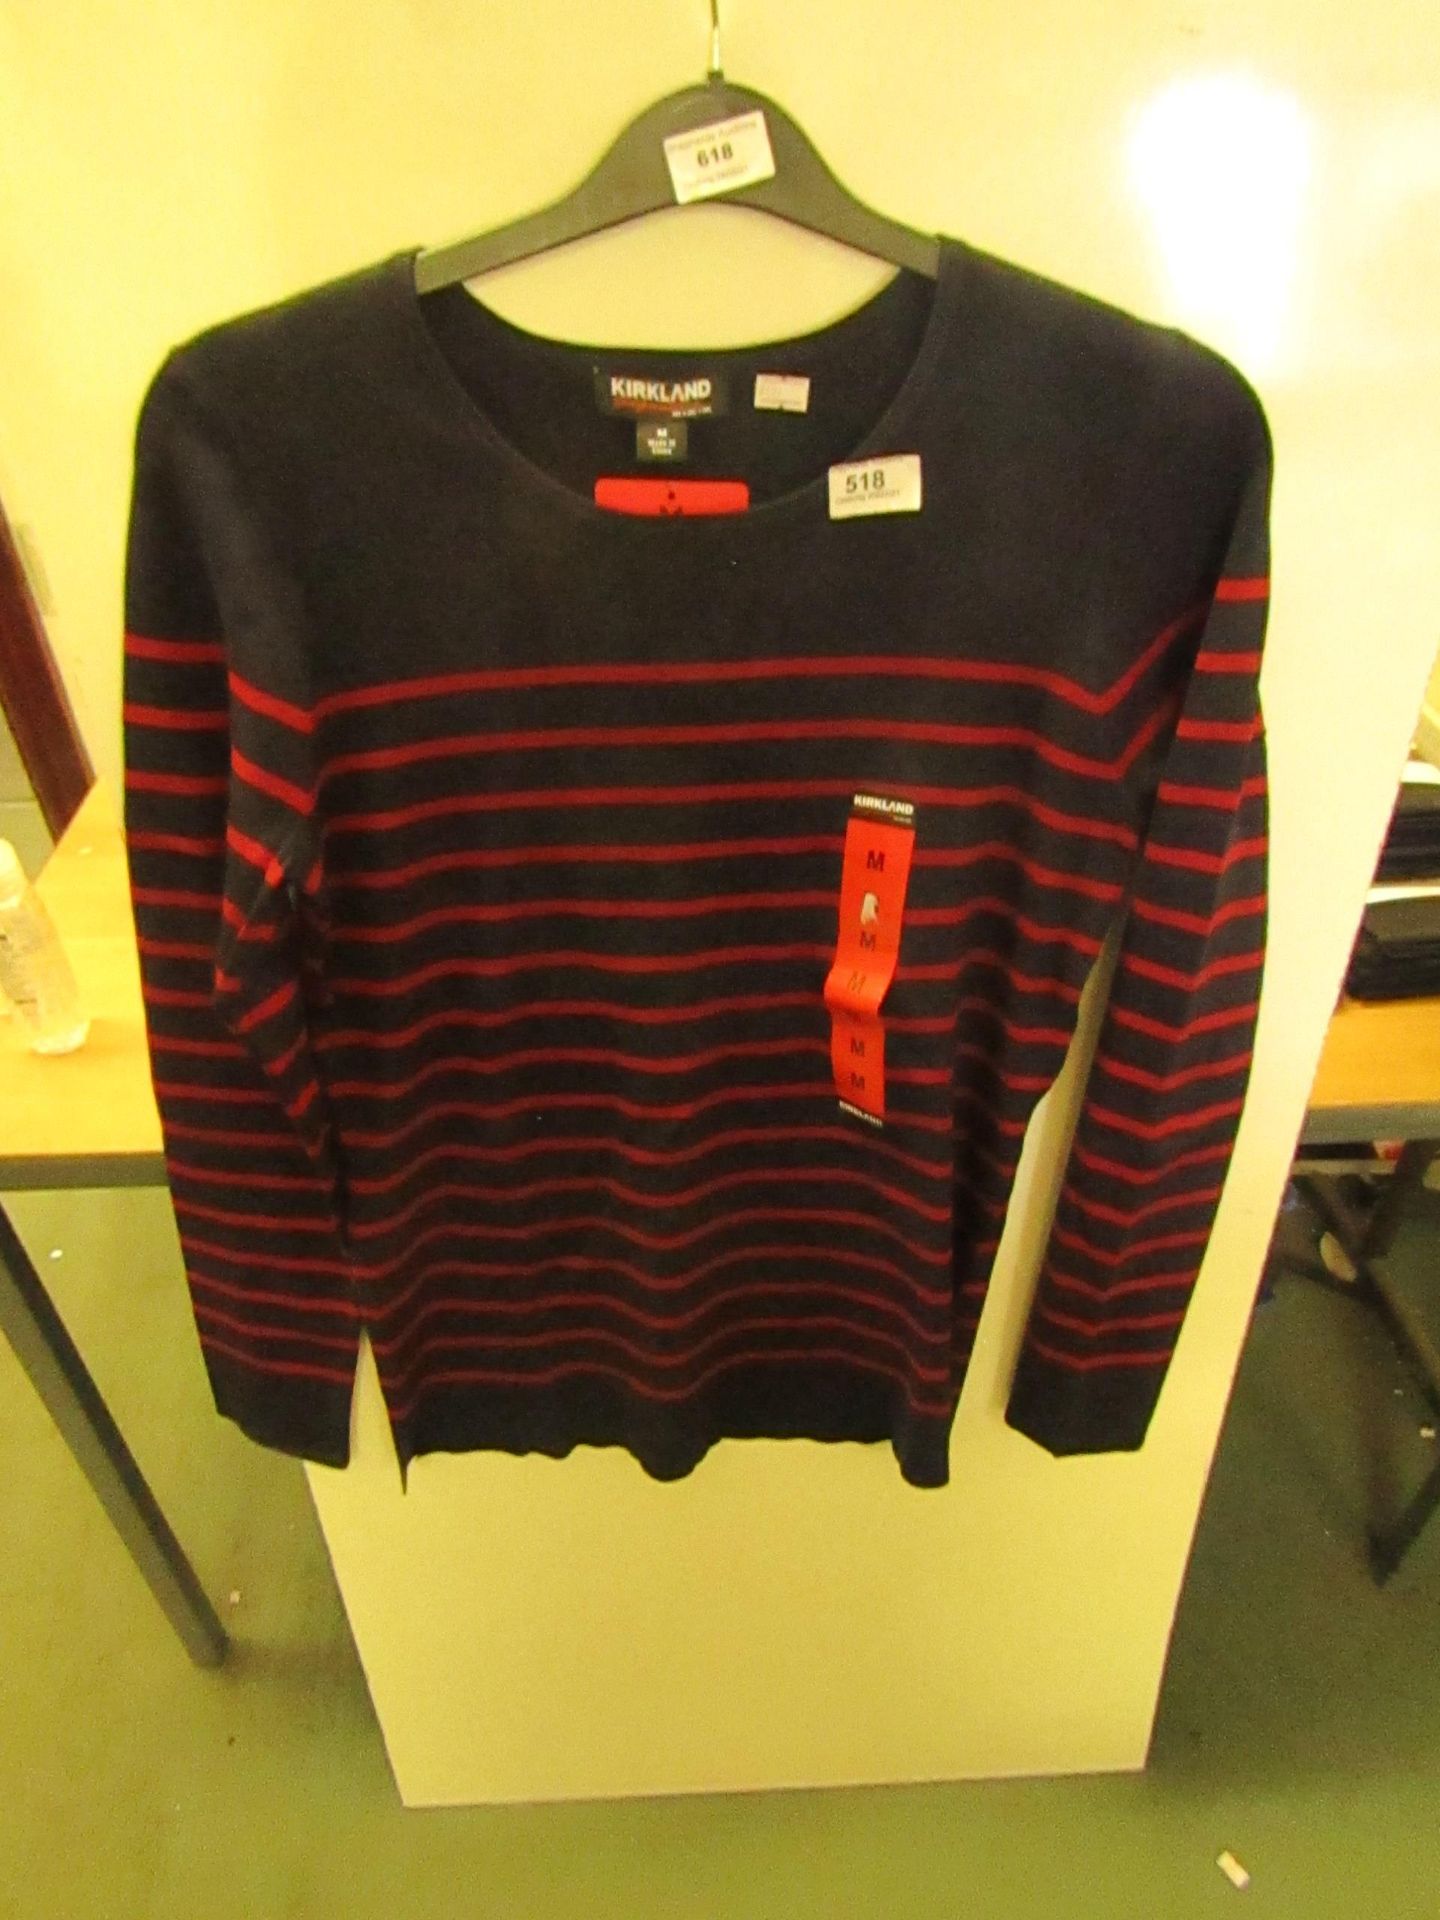 Kirkand Signature Ladies Crew Neck Sweater Navy/Red Stripe Size L New With Tags